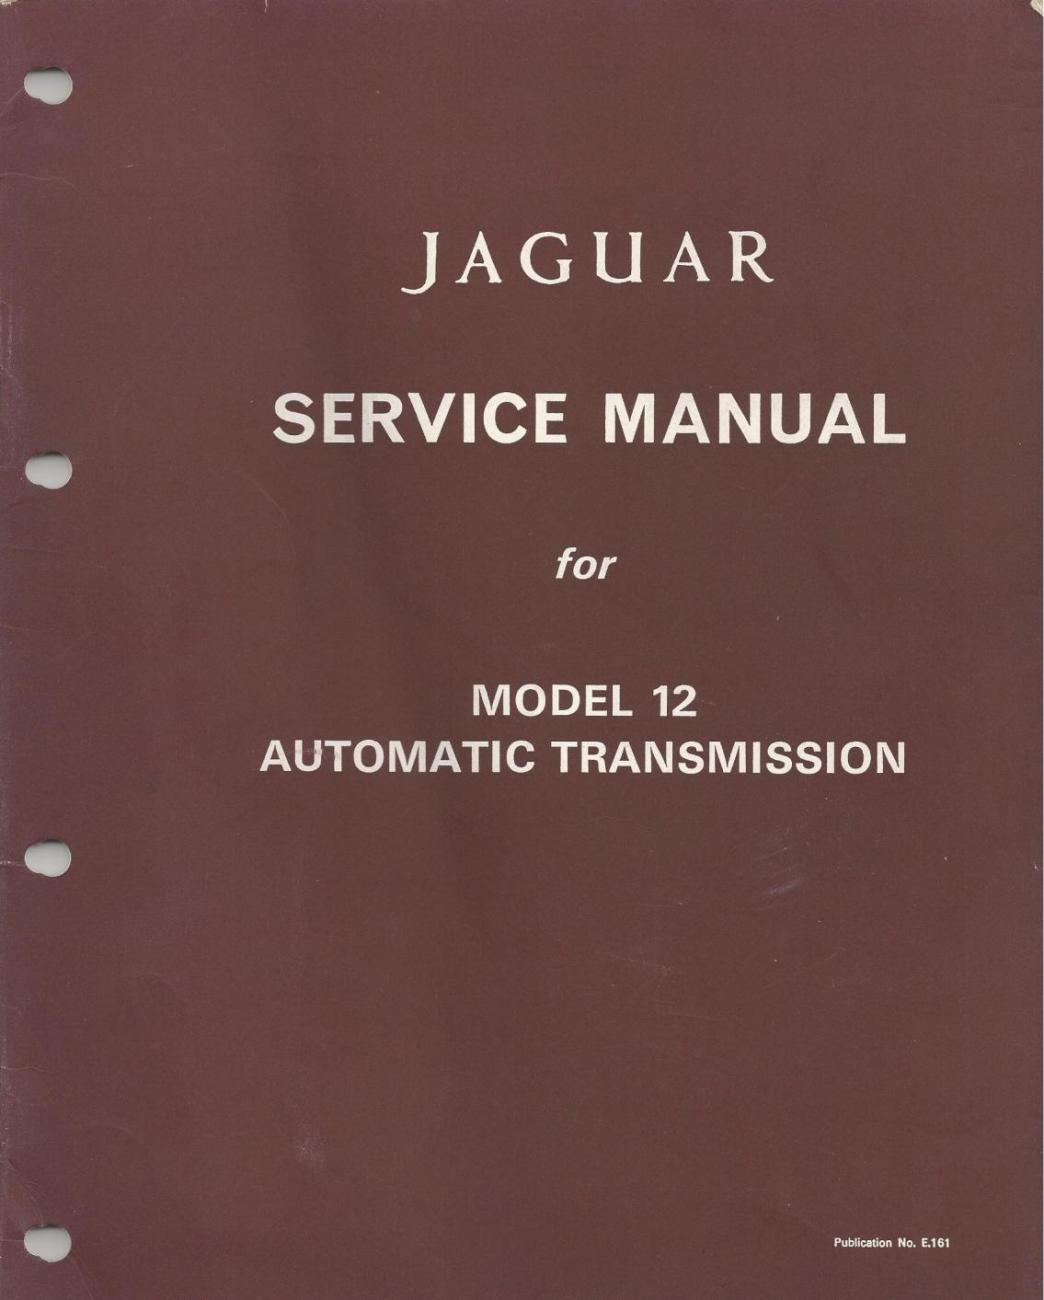 Service manual for the Model 12